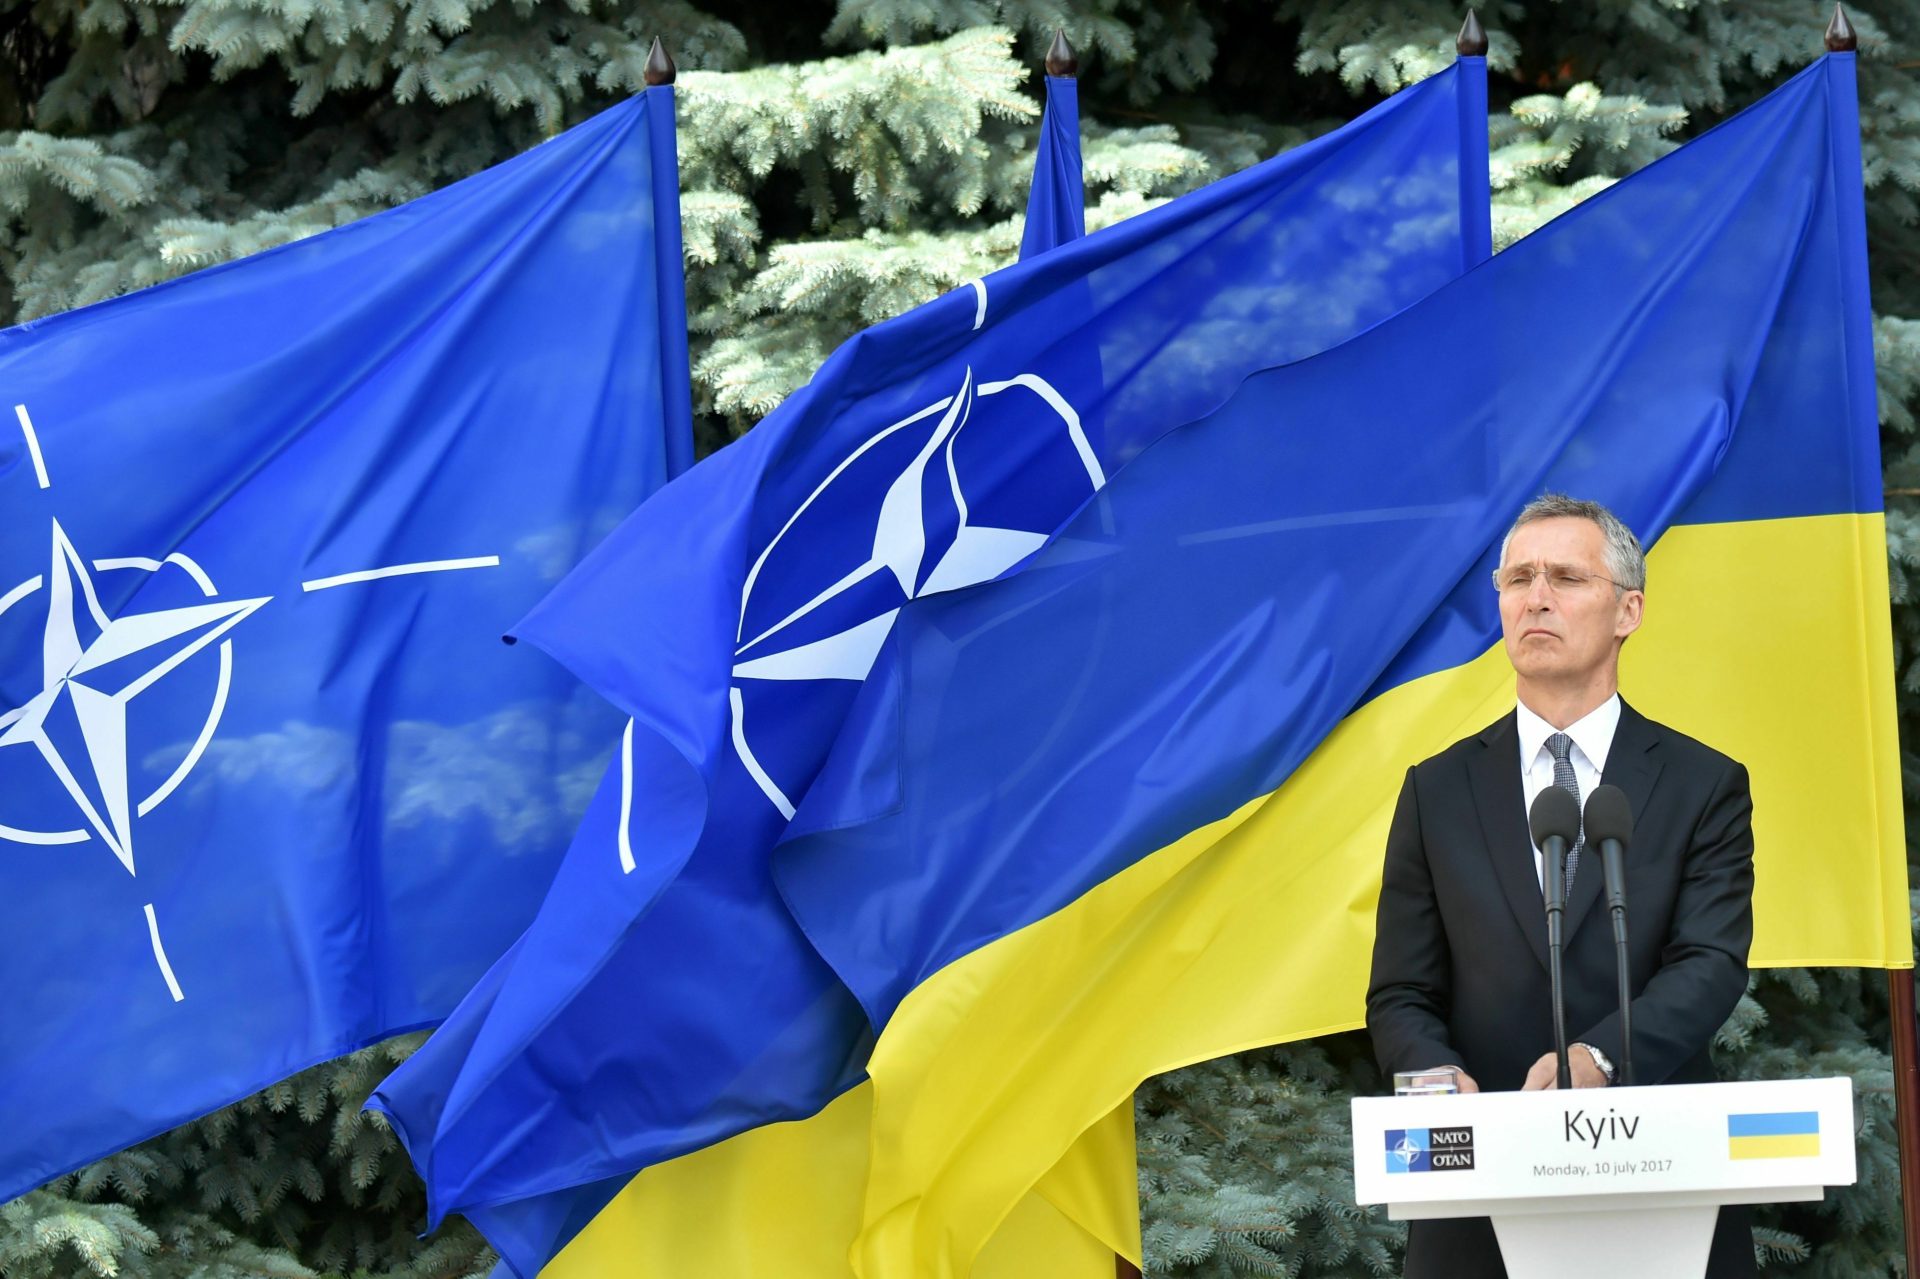 NATO says members must choose Ukraine aid over own defense